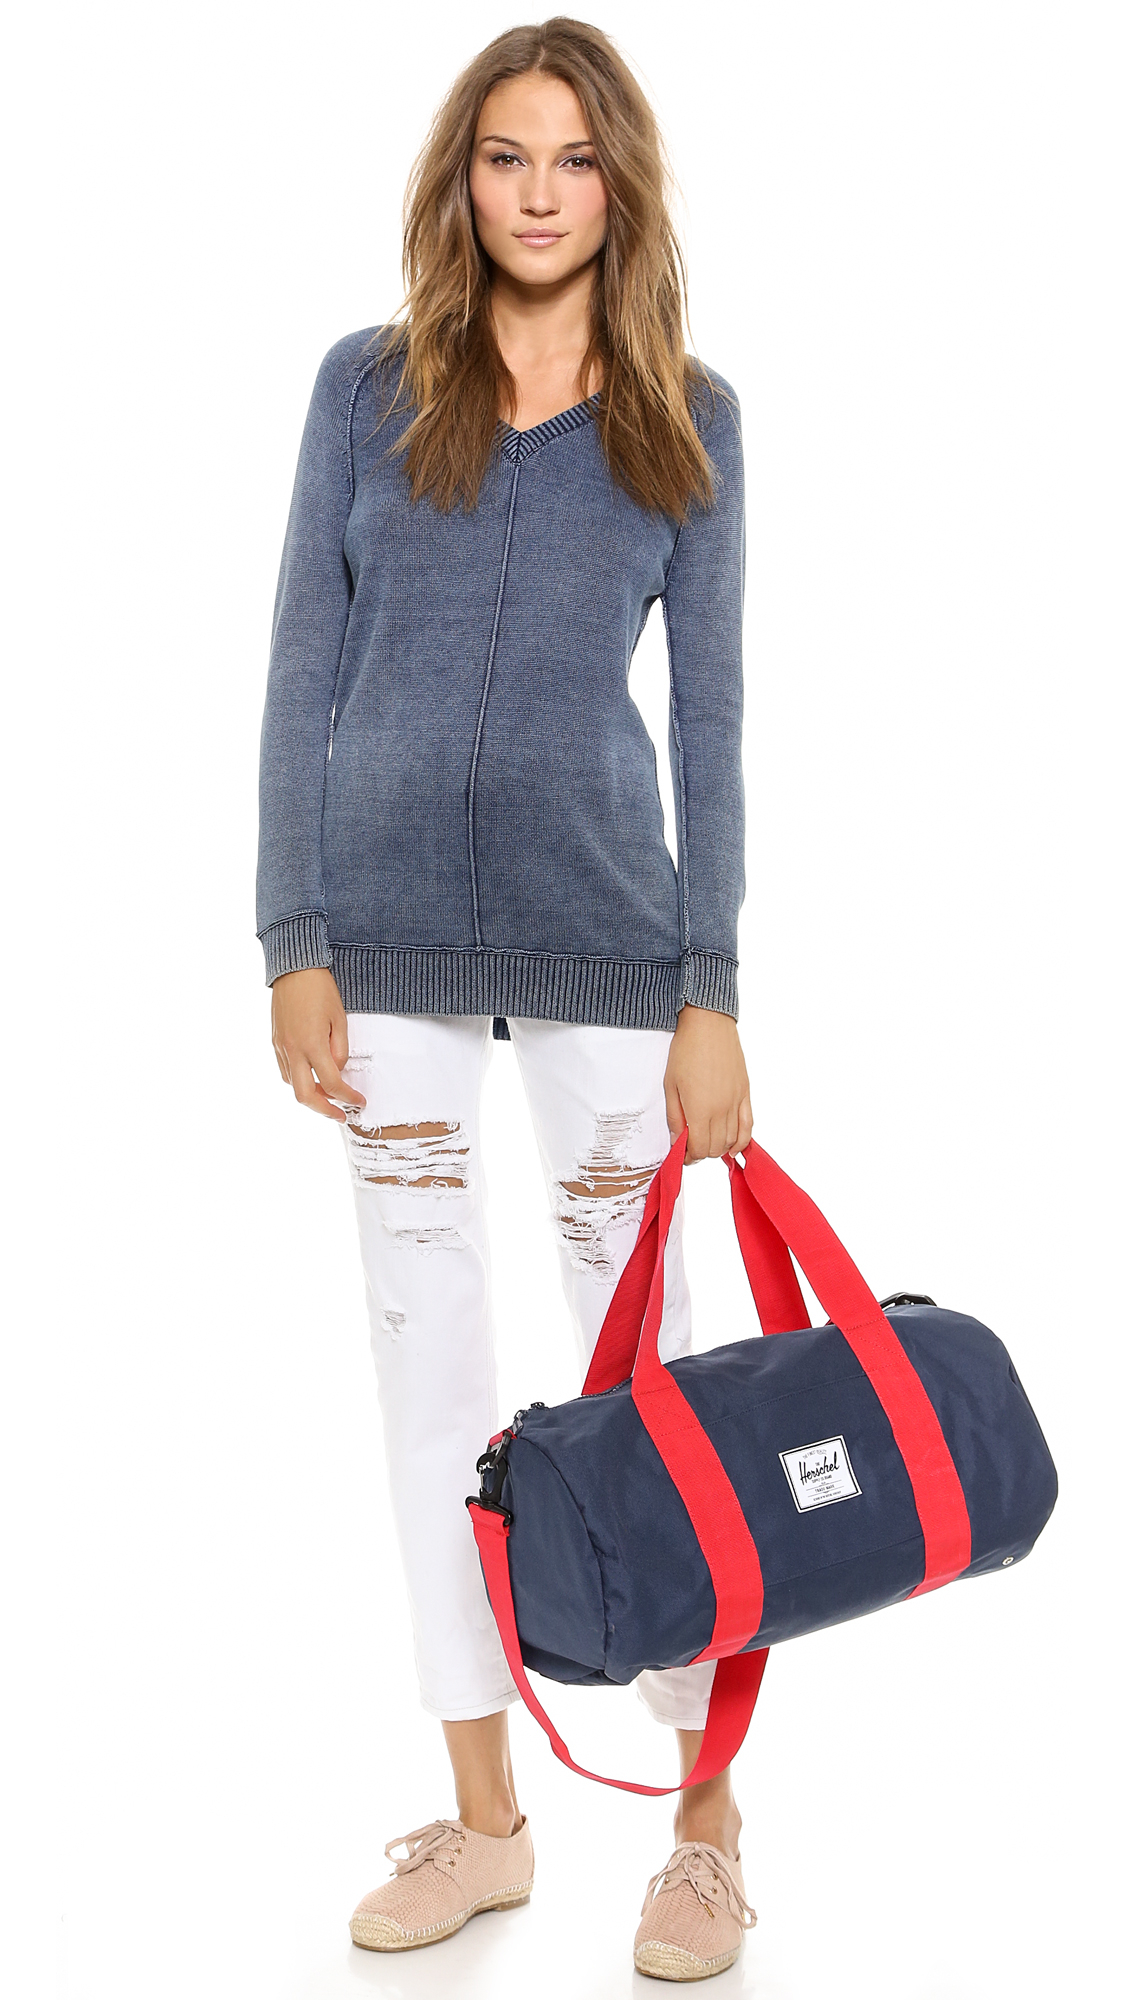 Herschel Supply Co. Strand Duffle Bag - Navy/Red in Blue | Lyst